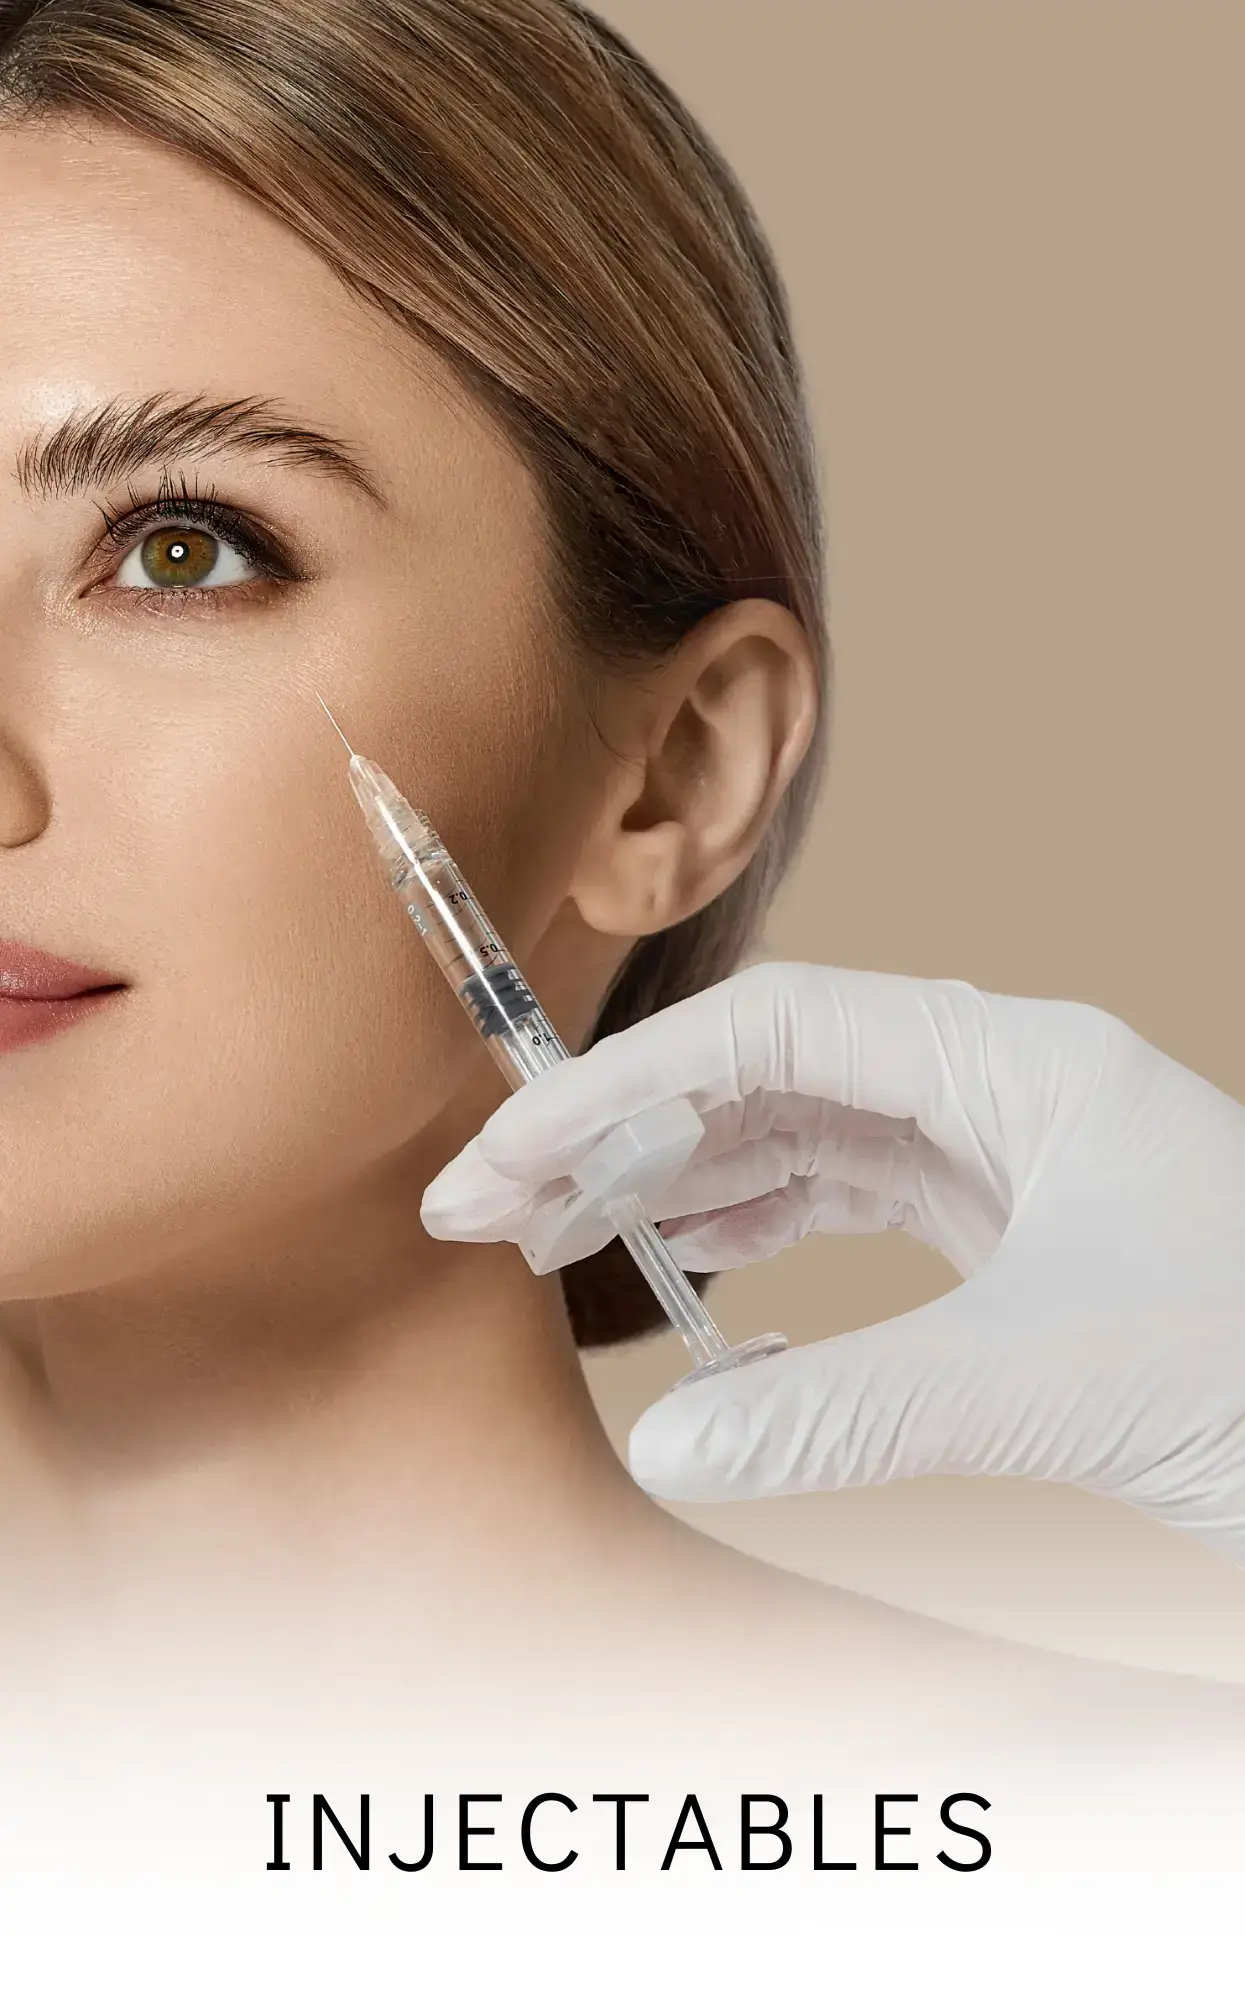 IMAGE - SERVICES - INJECTABLES1